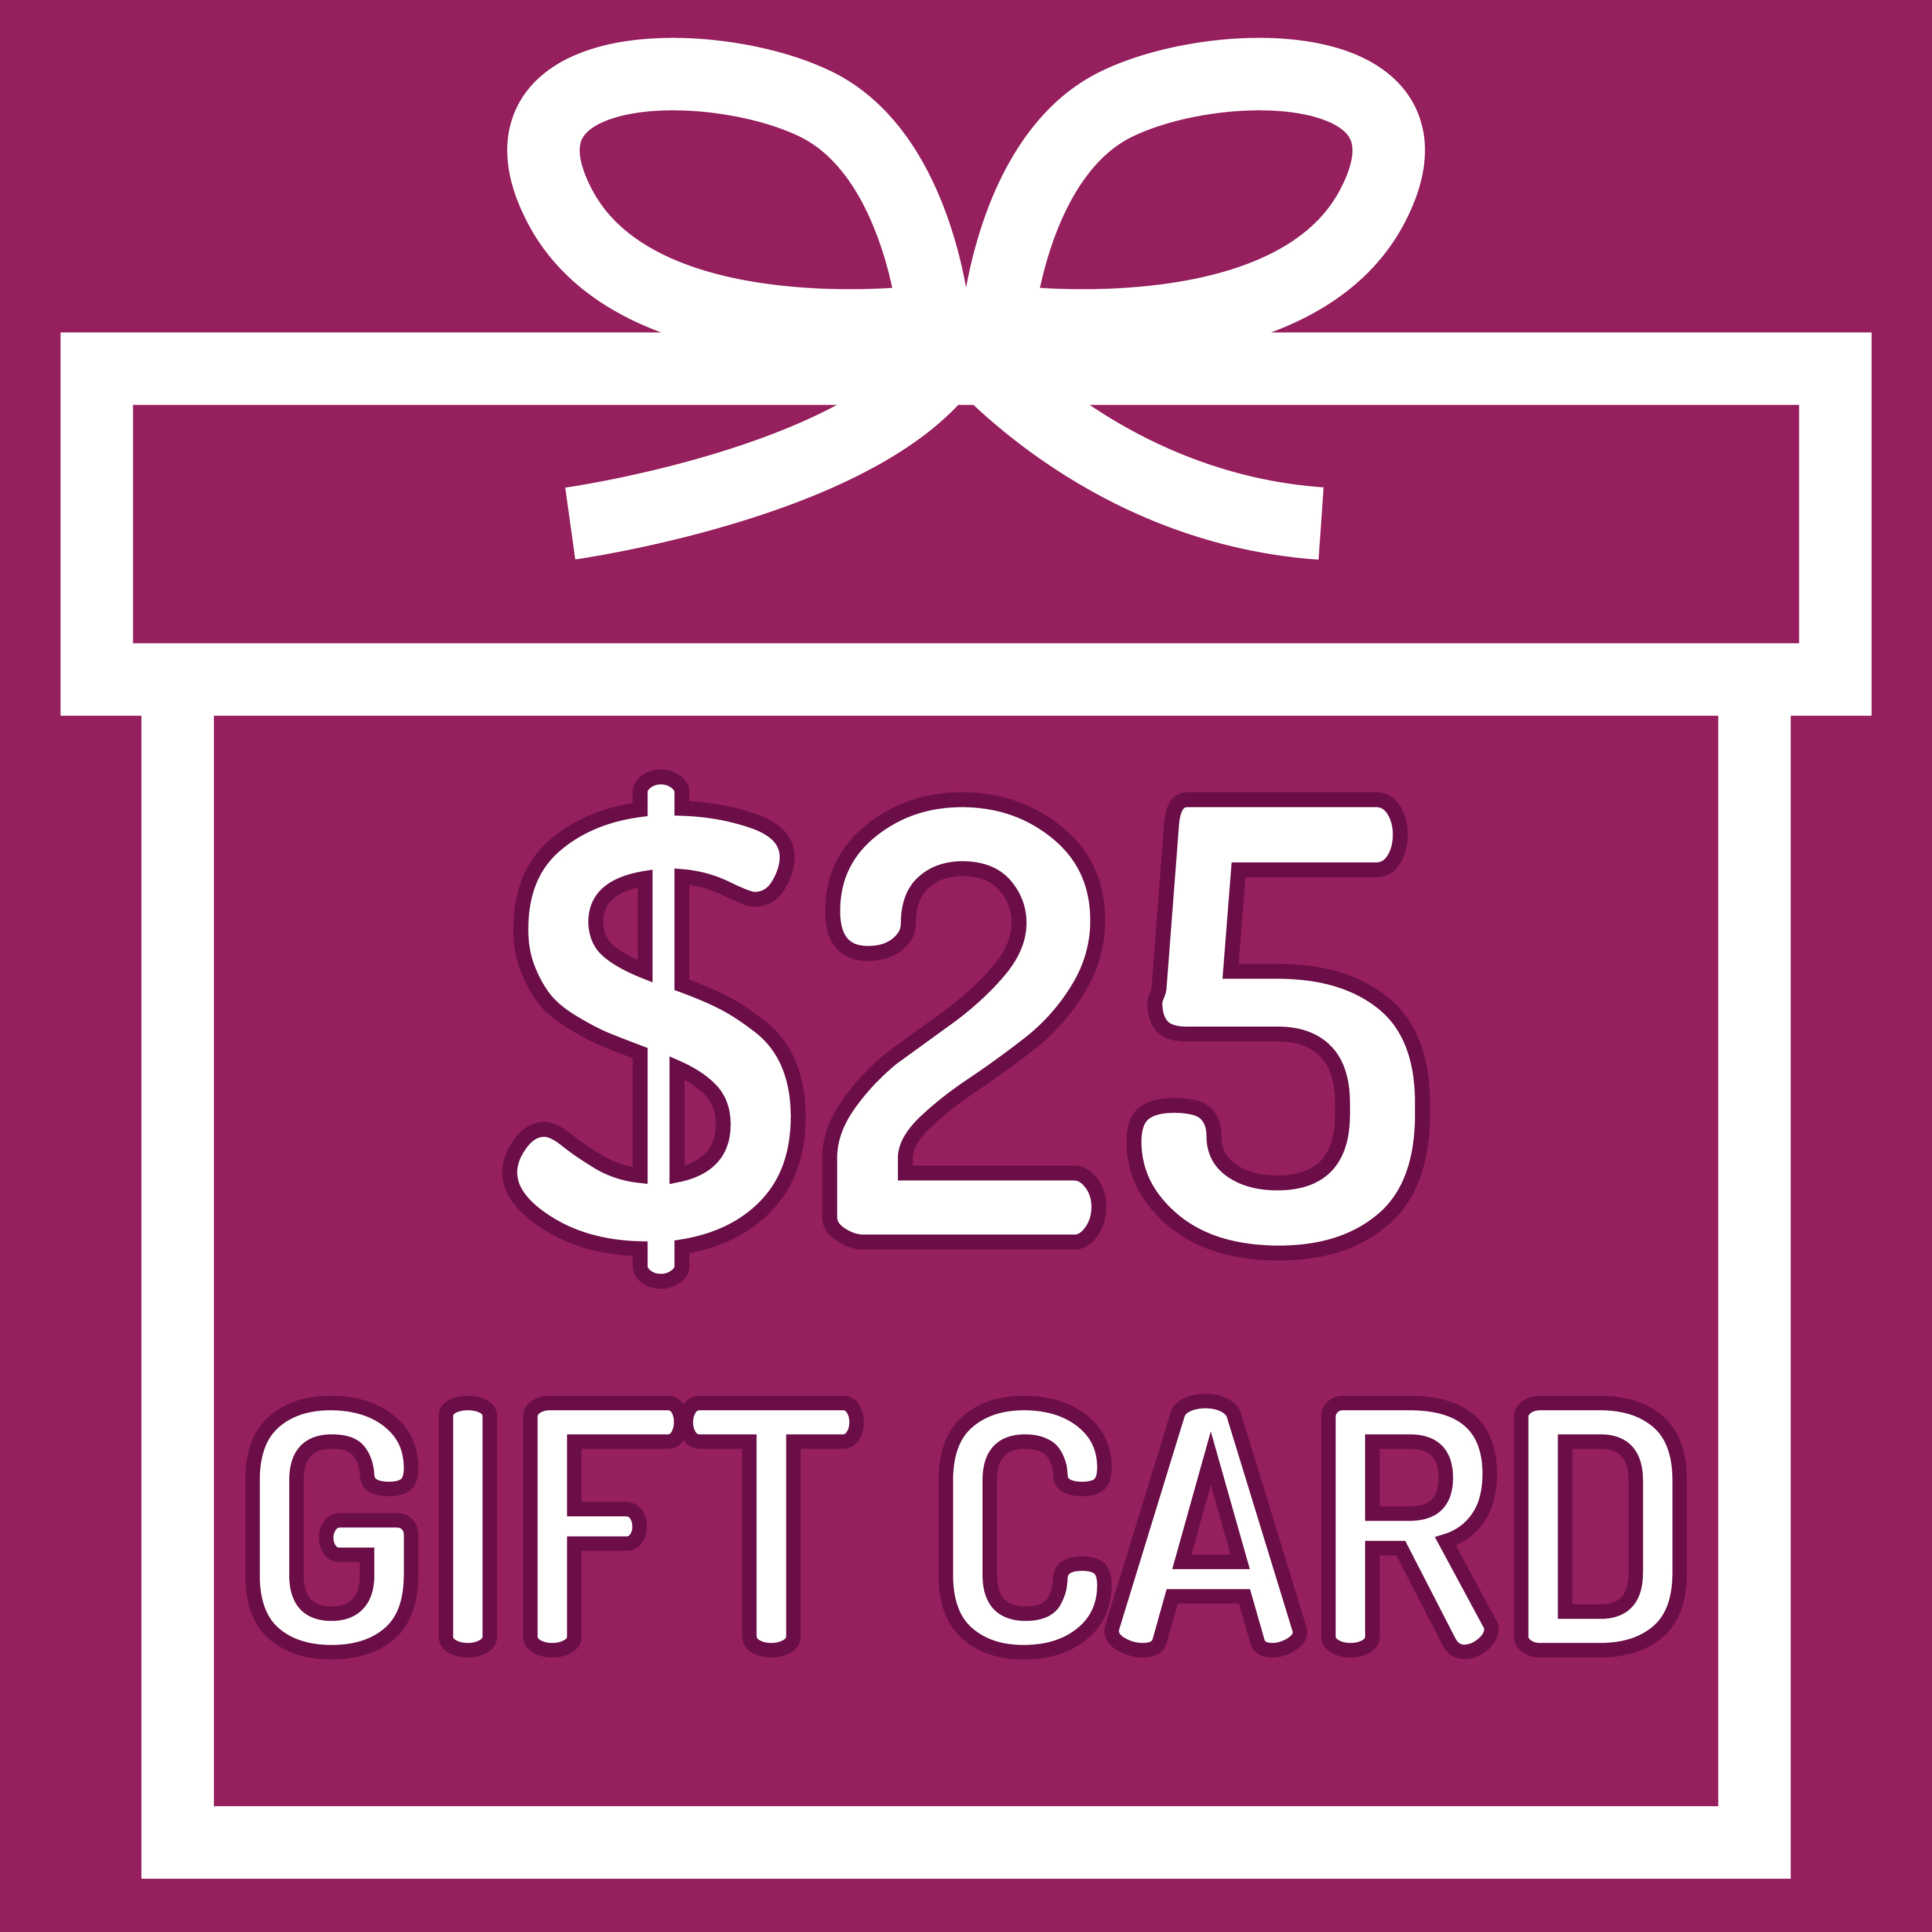 image of $25 Gift Card